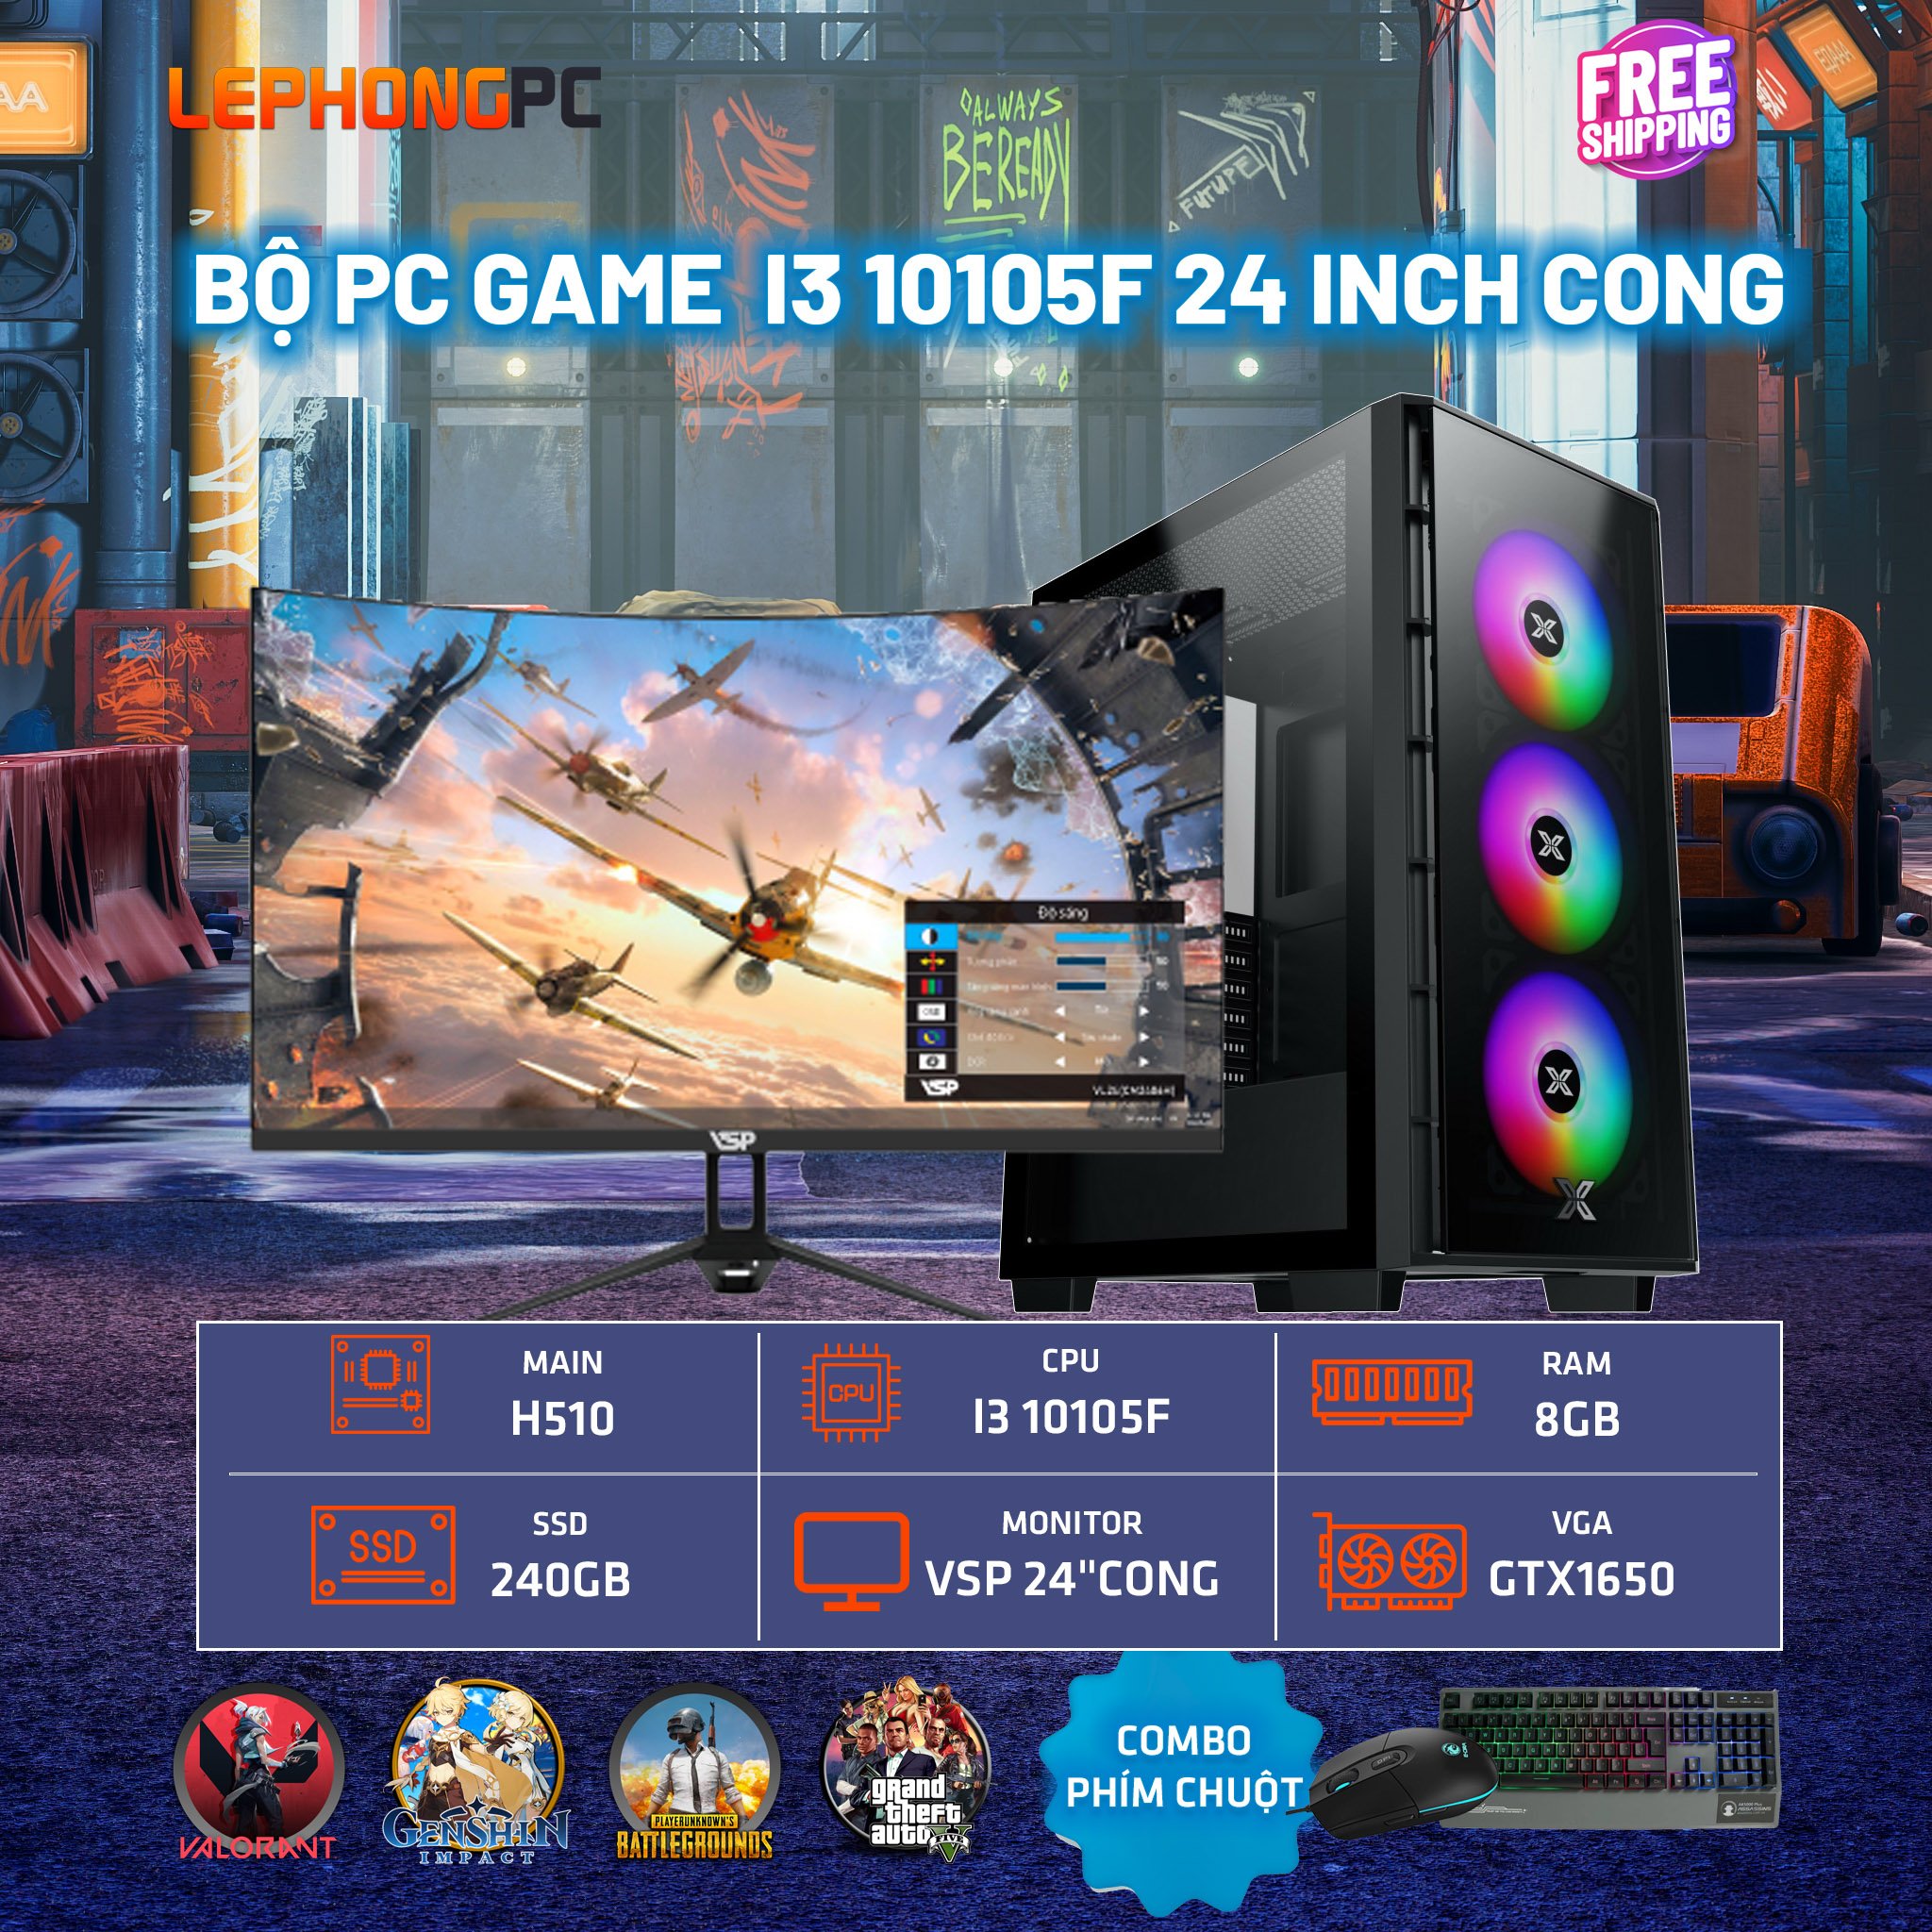 BO PC GAME I3 10105F 24 INCH CONG 30 12 22